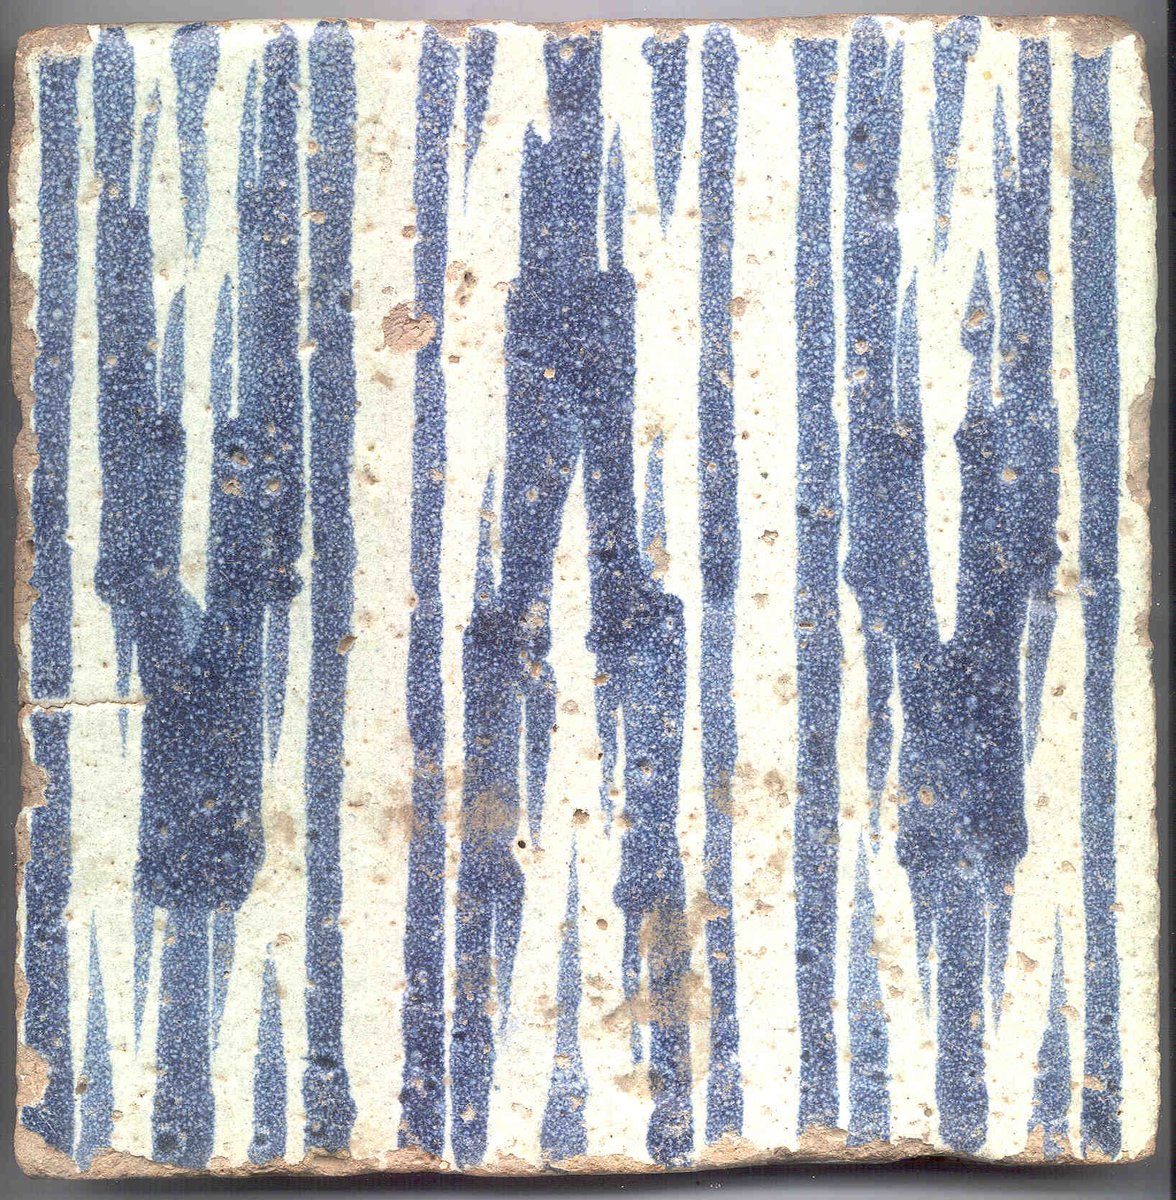 The final thing I want to point out is the floor, with its ikat covering. This may well be an actual piece of ikat cloth. However, during this period, tiles were also made to give an ikat effect, through a different medium. More info here:  http://collections.vam.ac.uk/item/O1264033/tehran-floor-tile-imitating-ikat-tile-unknown/